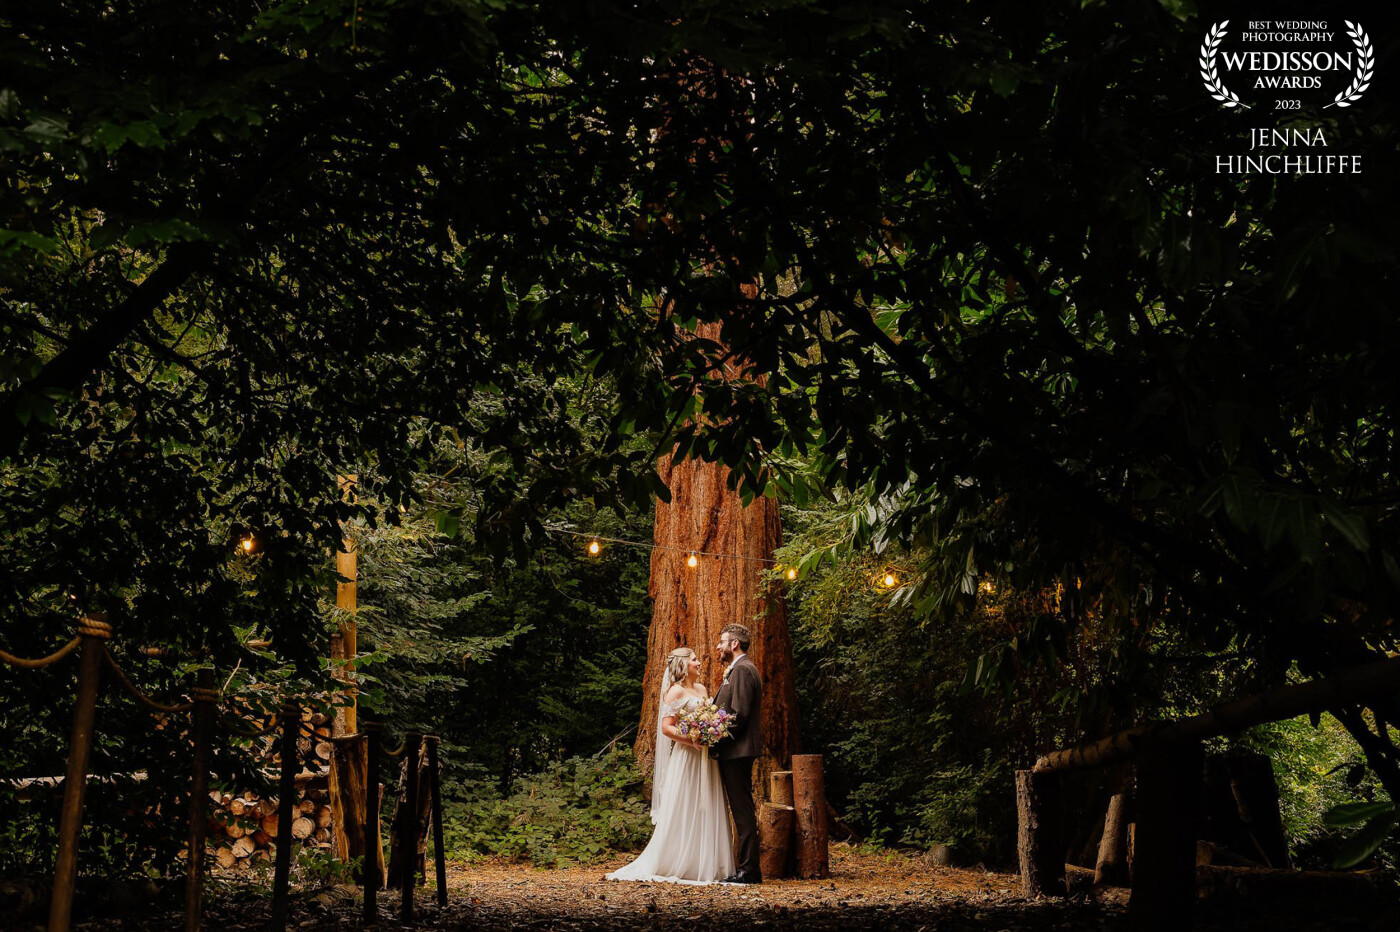 Loved incorporating the trees into my couples portraits as it reflects their outdoor woodland wedding really well!